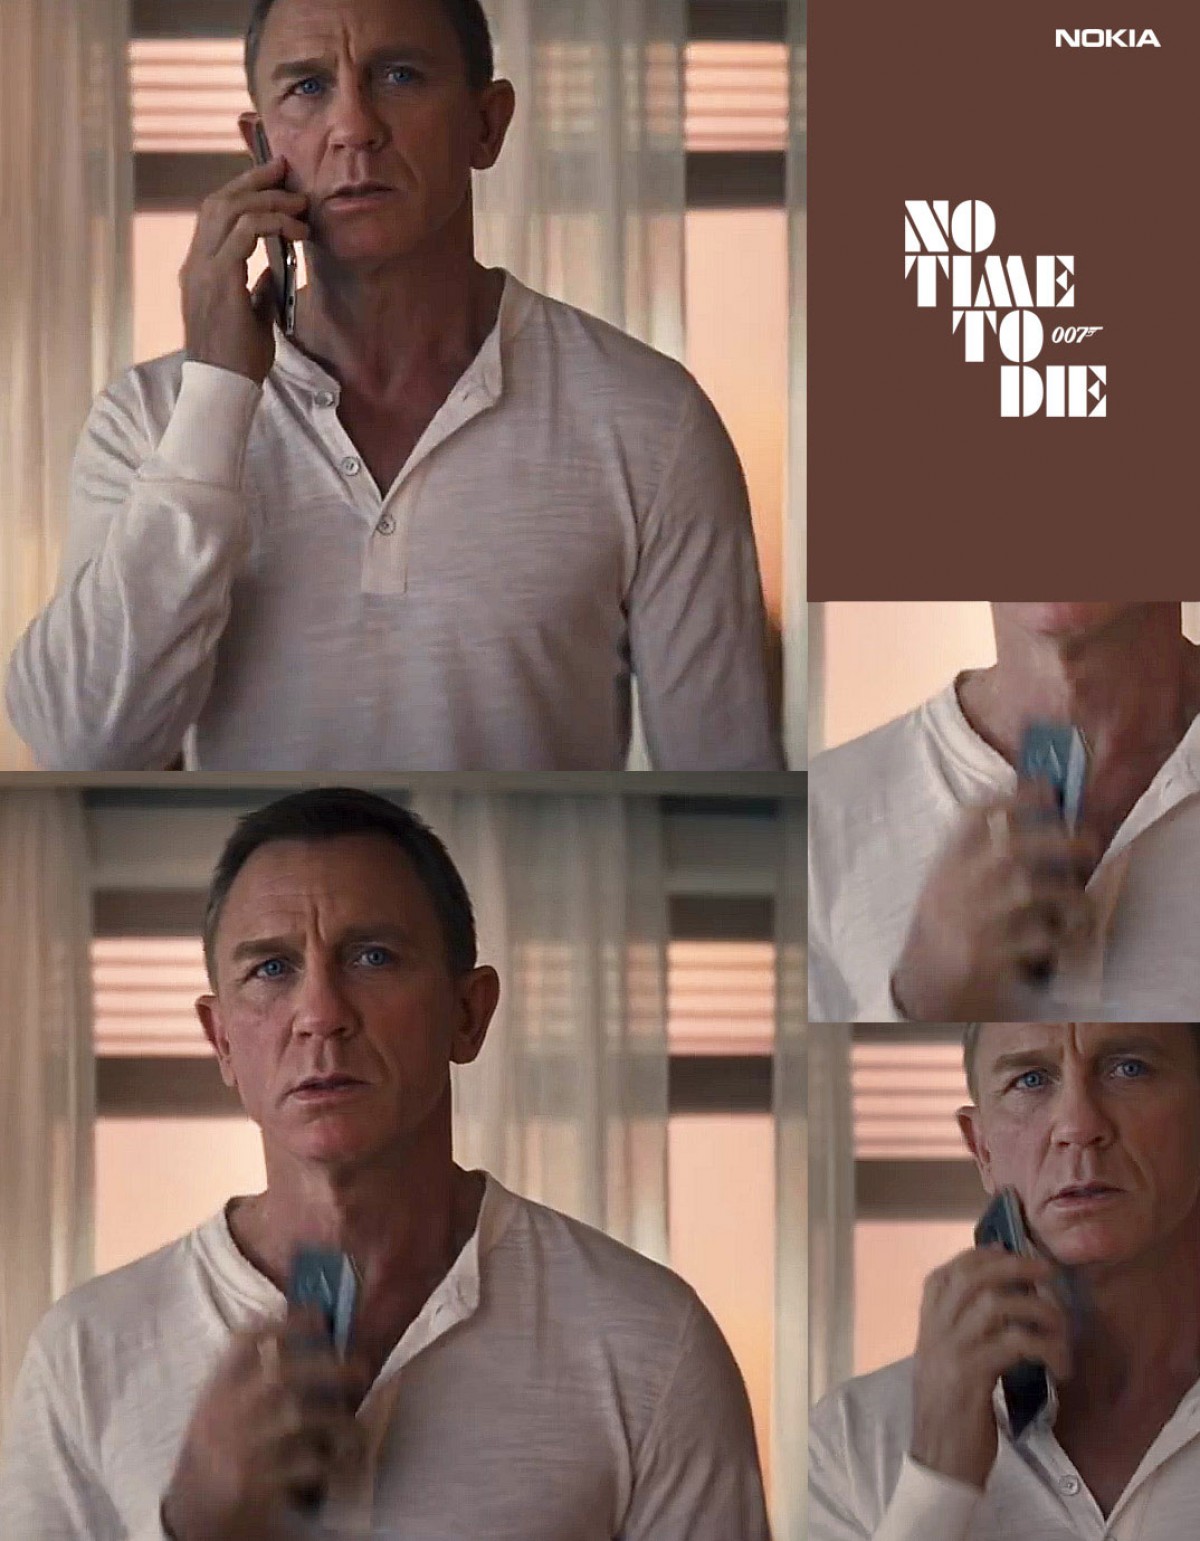 James Bond film No Time to Die further delayed to reshoot Nokia product placements